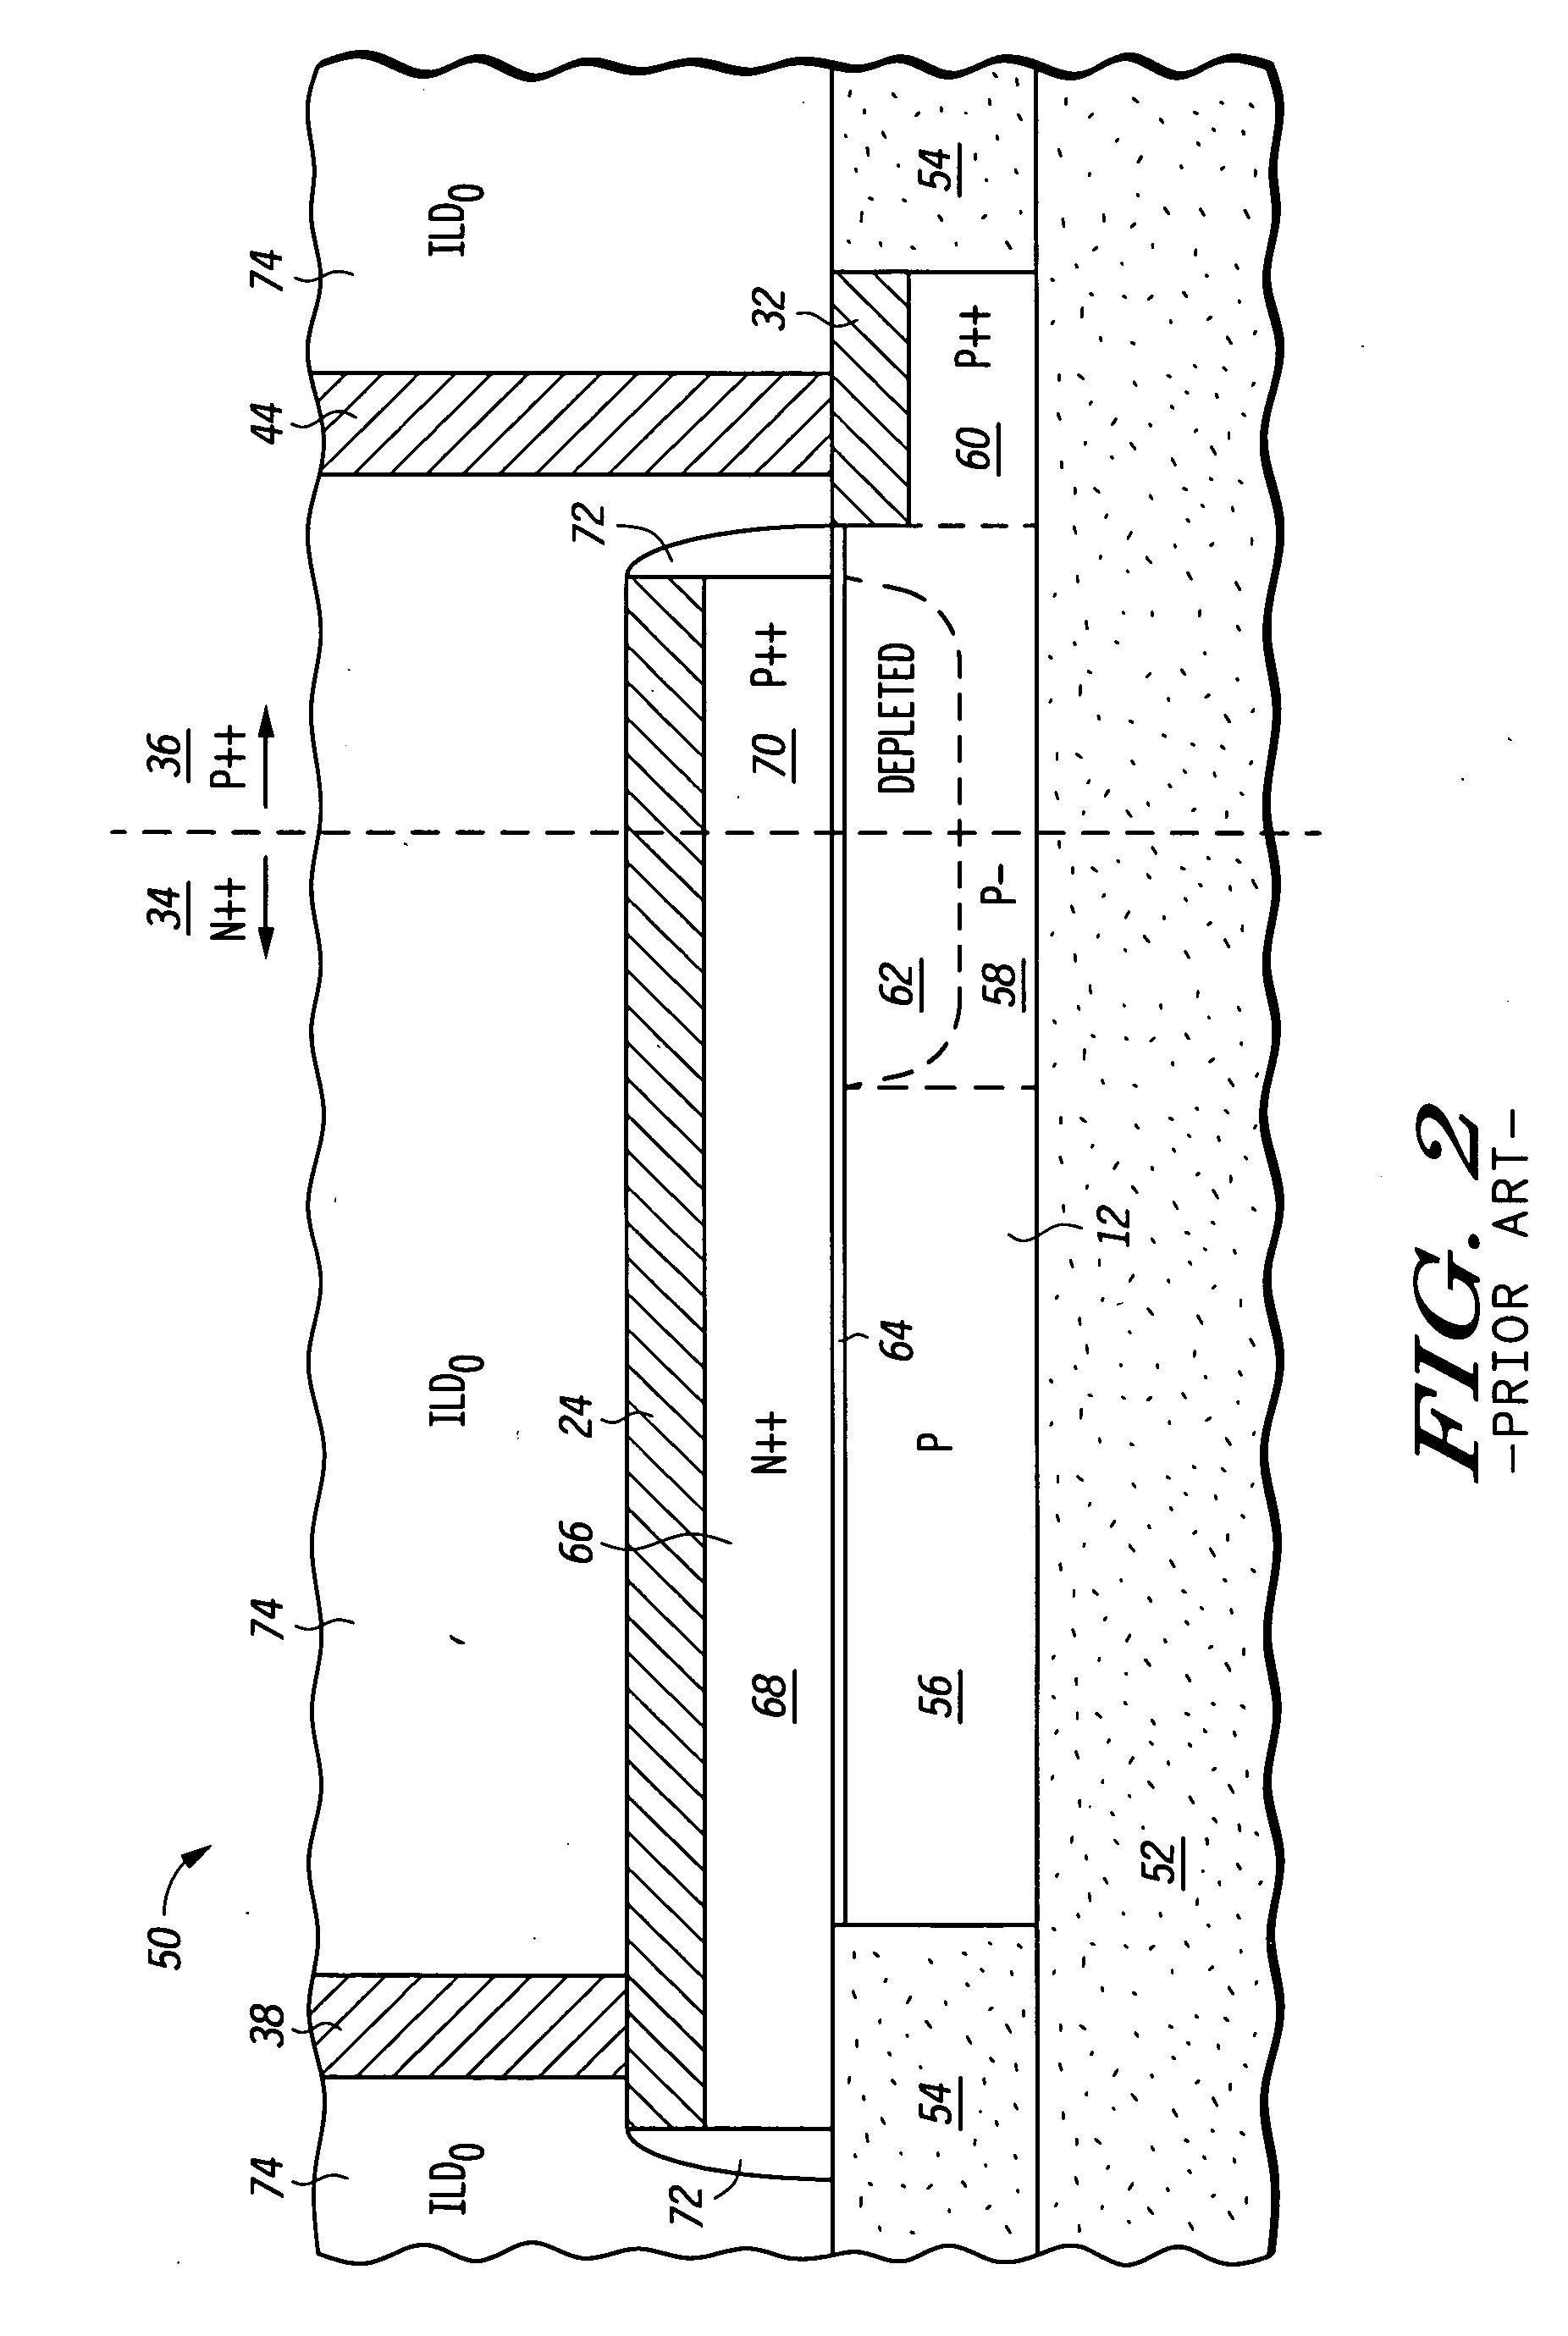 Method and apparatus for forming an SOI body-contacted transistor